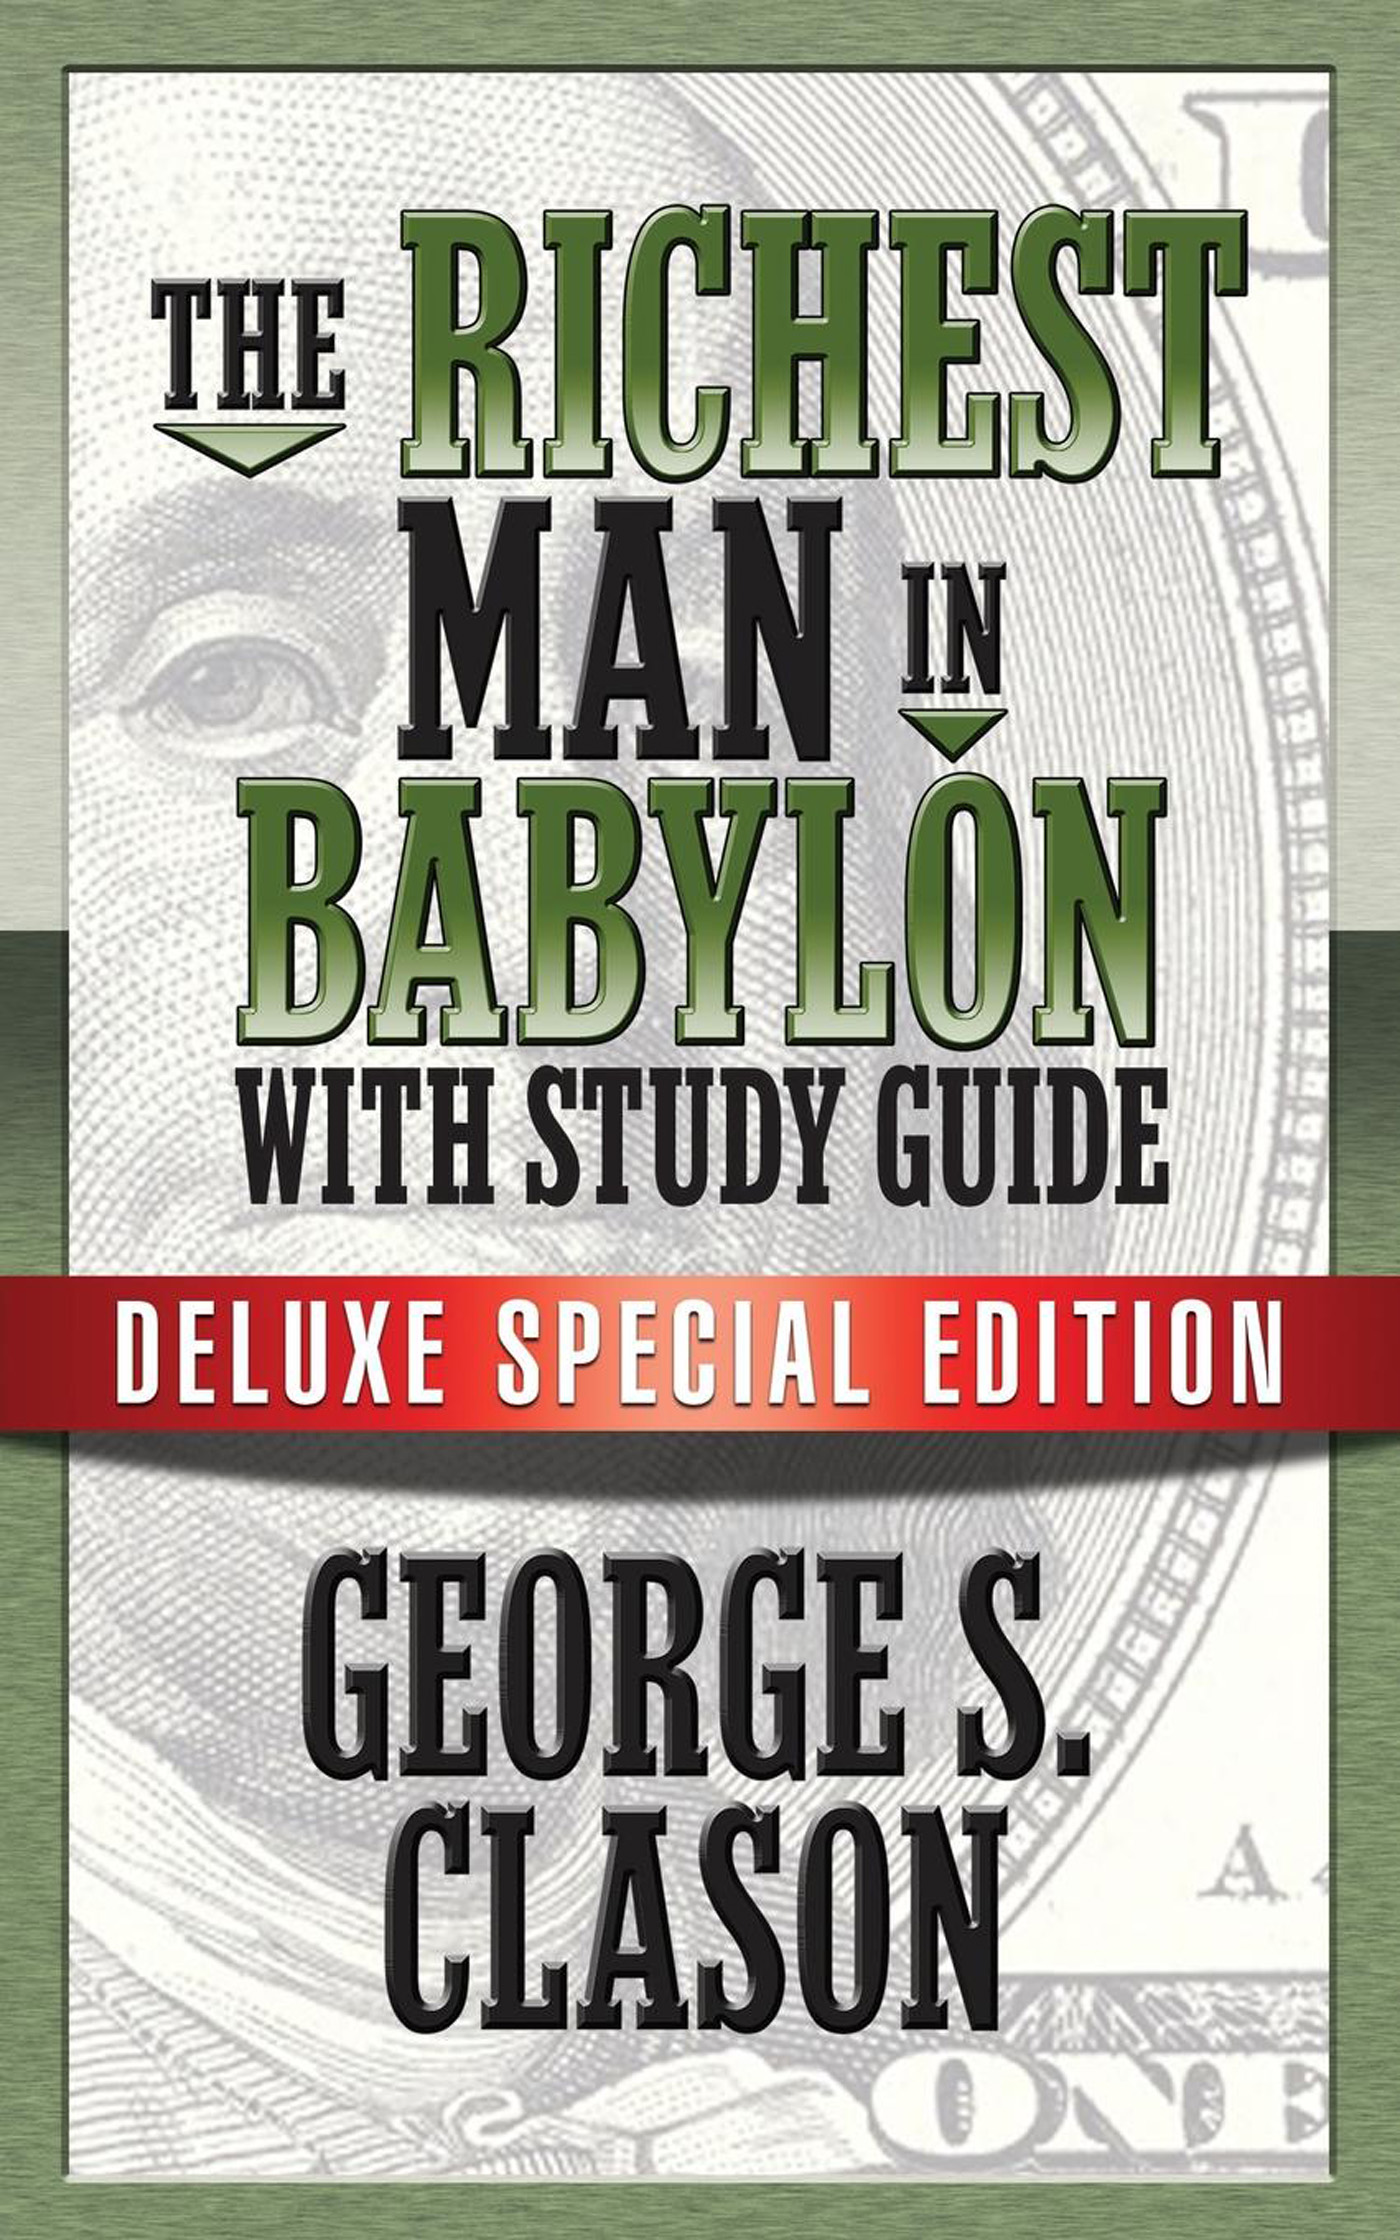 The Richest Man In Babylon with Study Guide Deluxe Special Edition - image 1